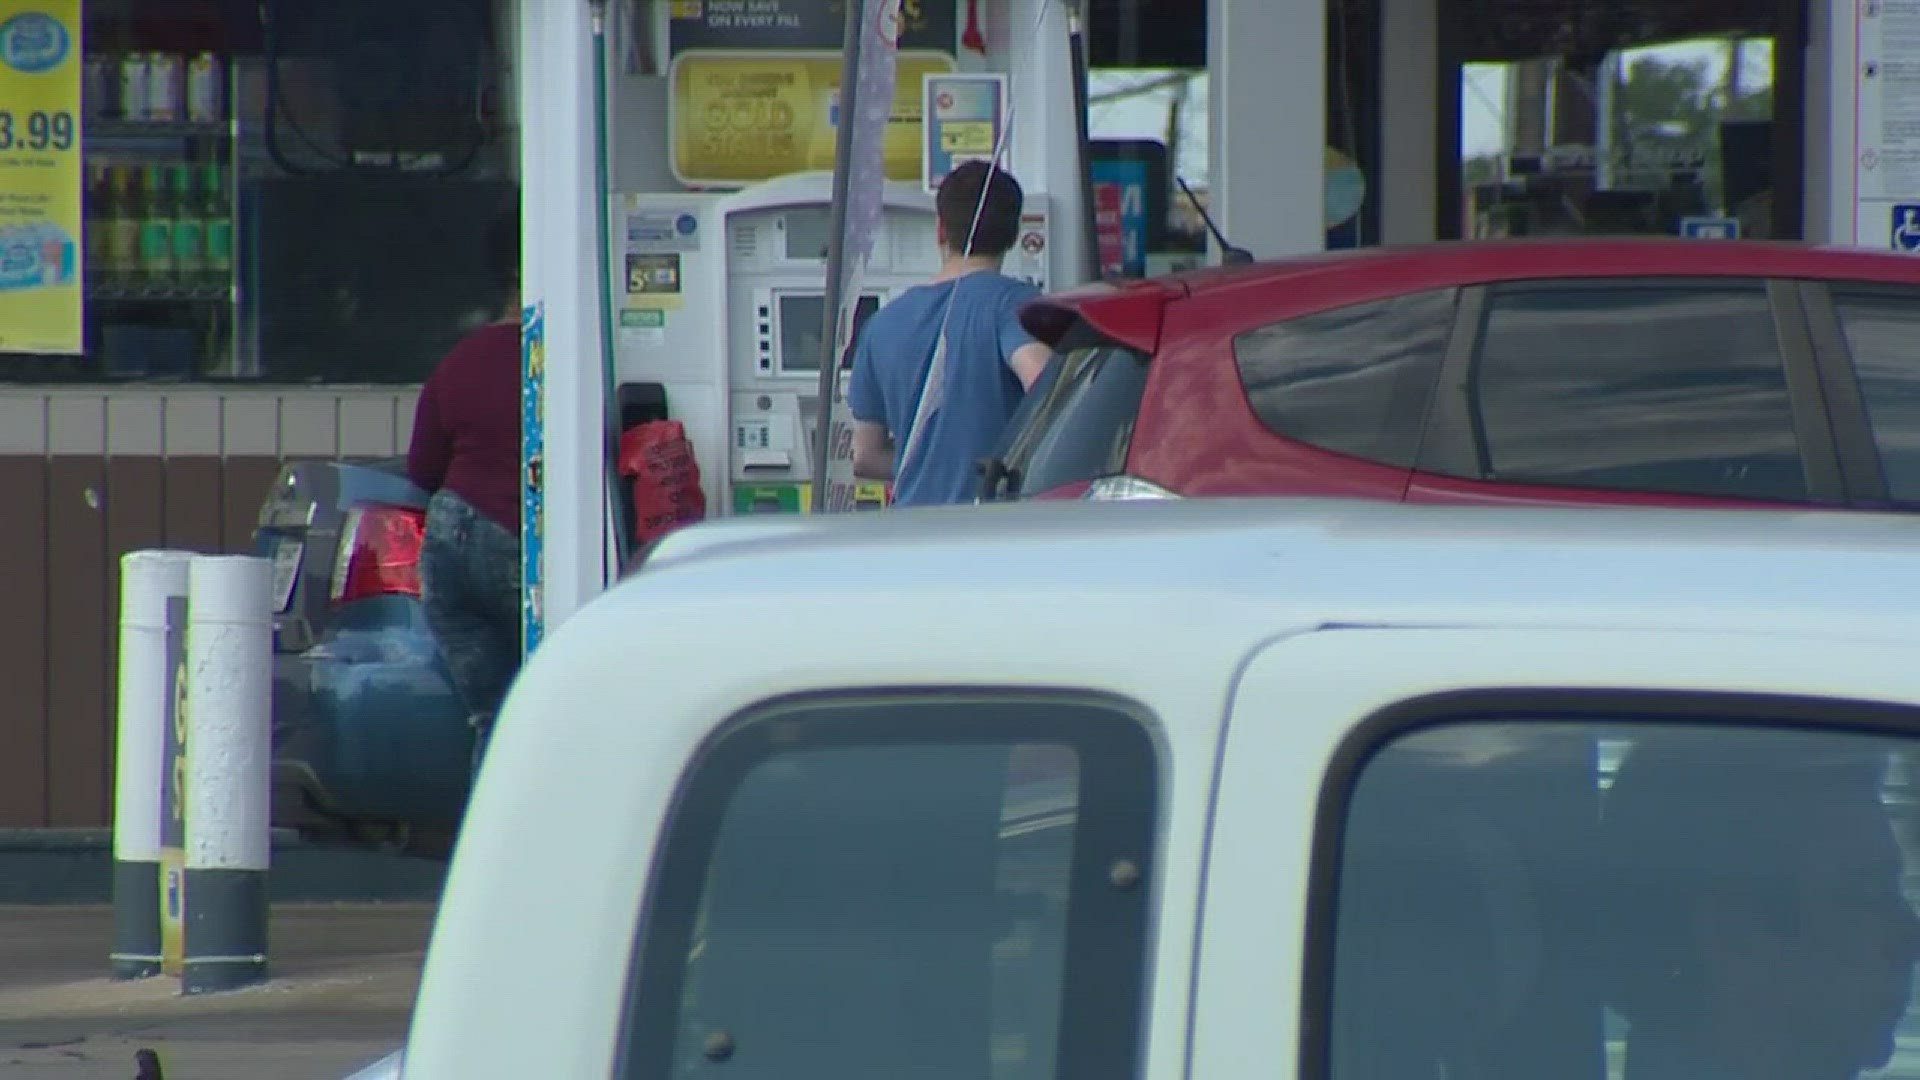 Daniel Armbruster with AAA Texas discusses gas prices amid a perceived gas shortage in the state.